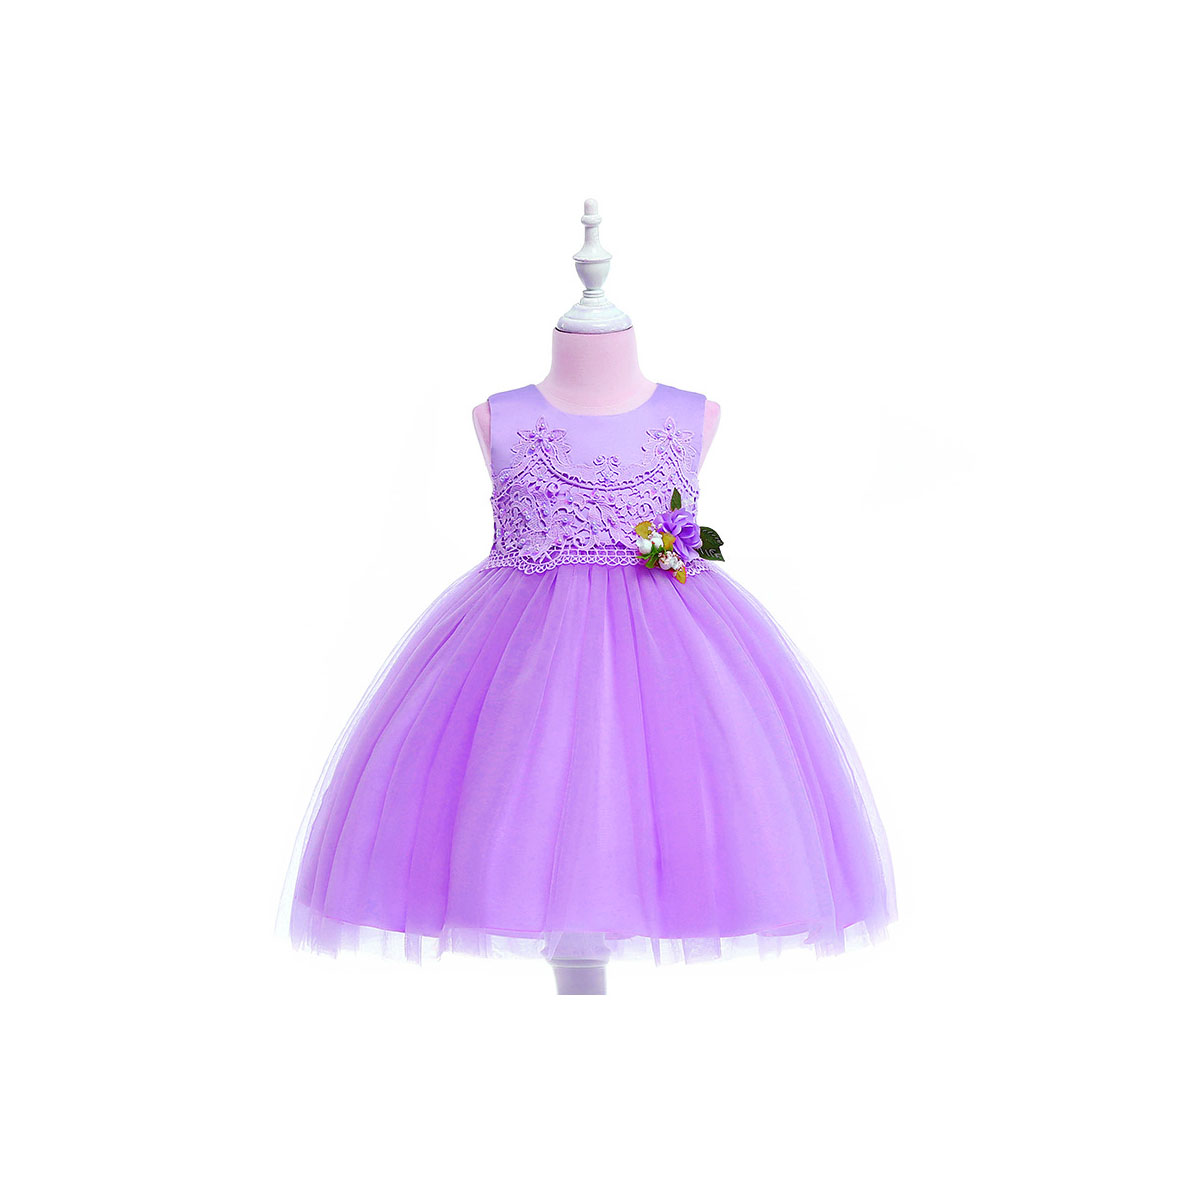 Pastoral Flower Girl Dress Lace Kids Princess Formal Birthday Party ...